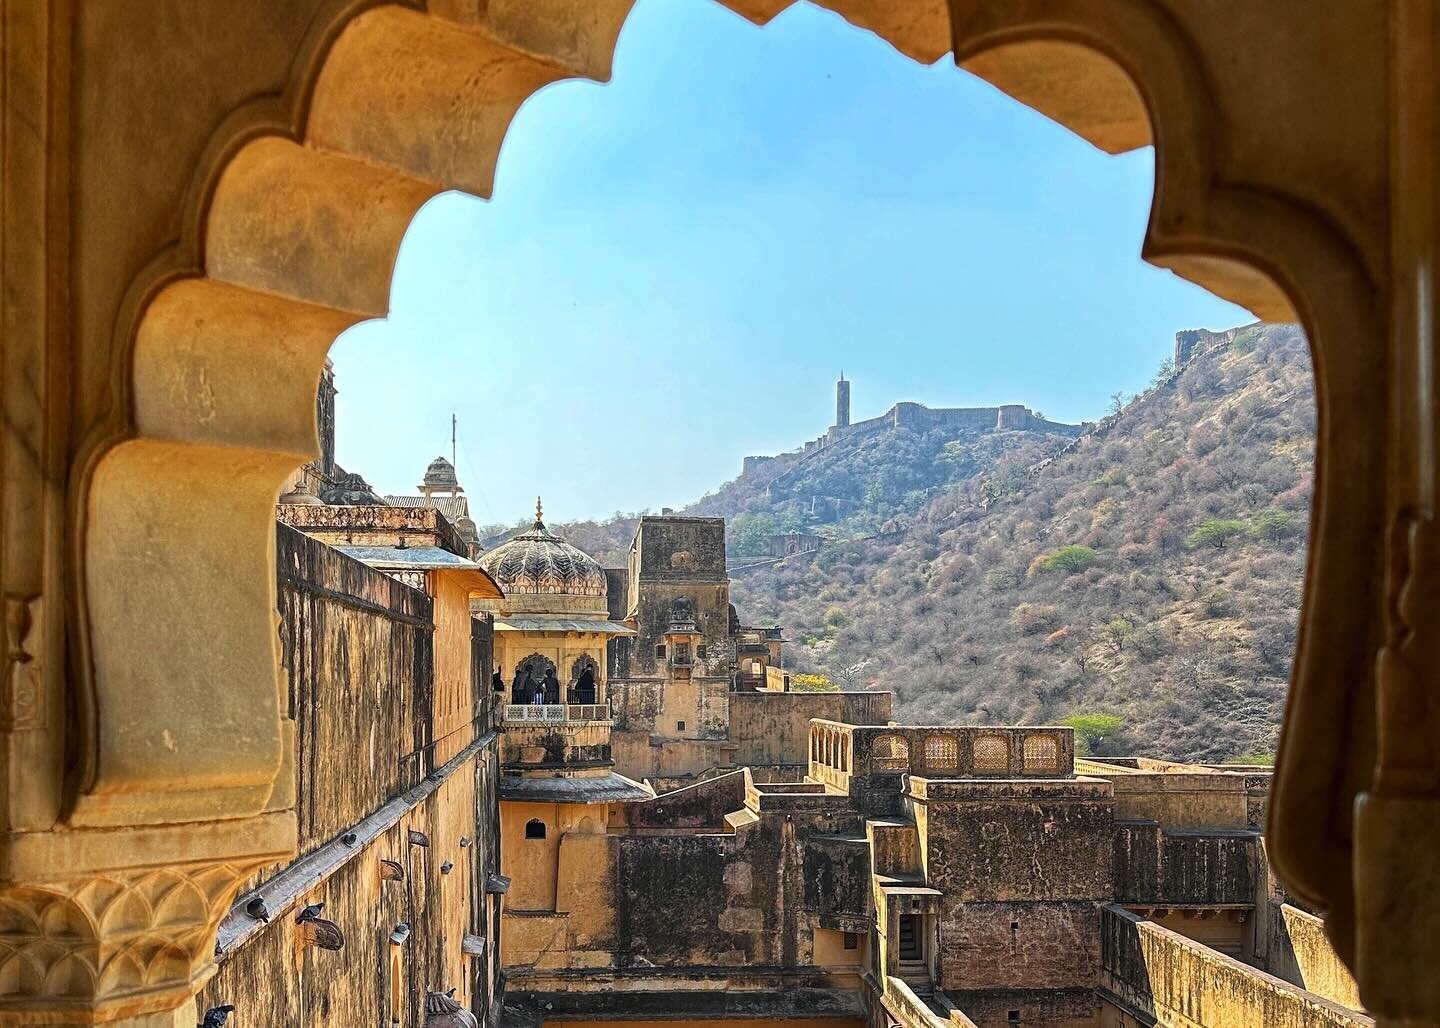 🕌 fortresses of jaipur

Rajasthan is home to over one hundred fortifications on its hills and mountain sides. 🚞 These forts, dubbed the &ldquo;Hill Forts of Rajasthan&rdquo; were built between the 5th-18th centuries by kings. 👑

One of these fortr